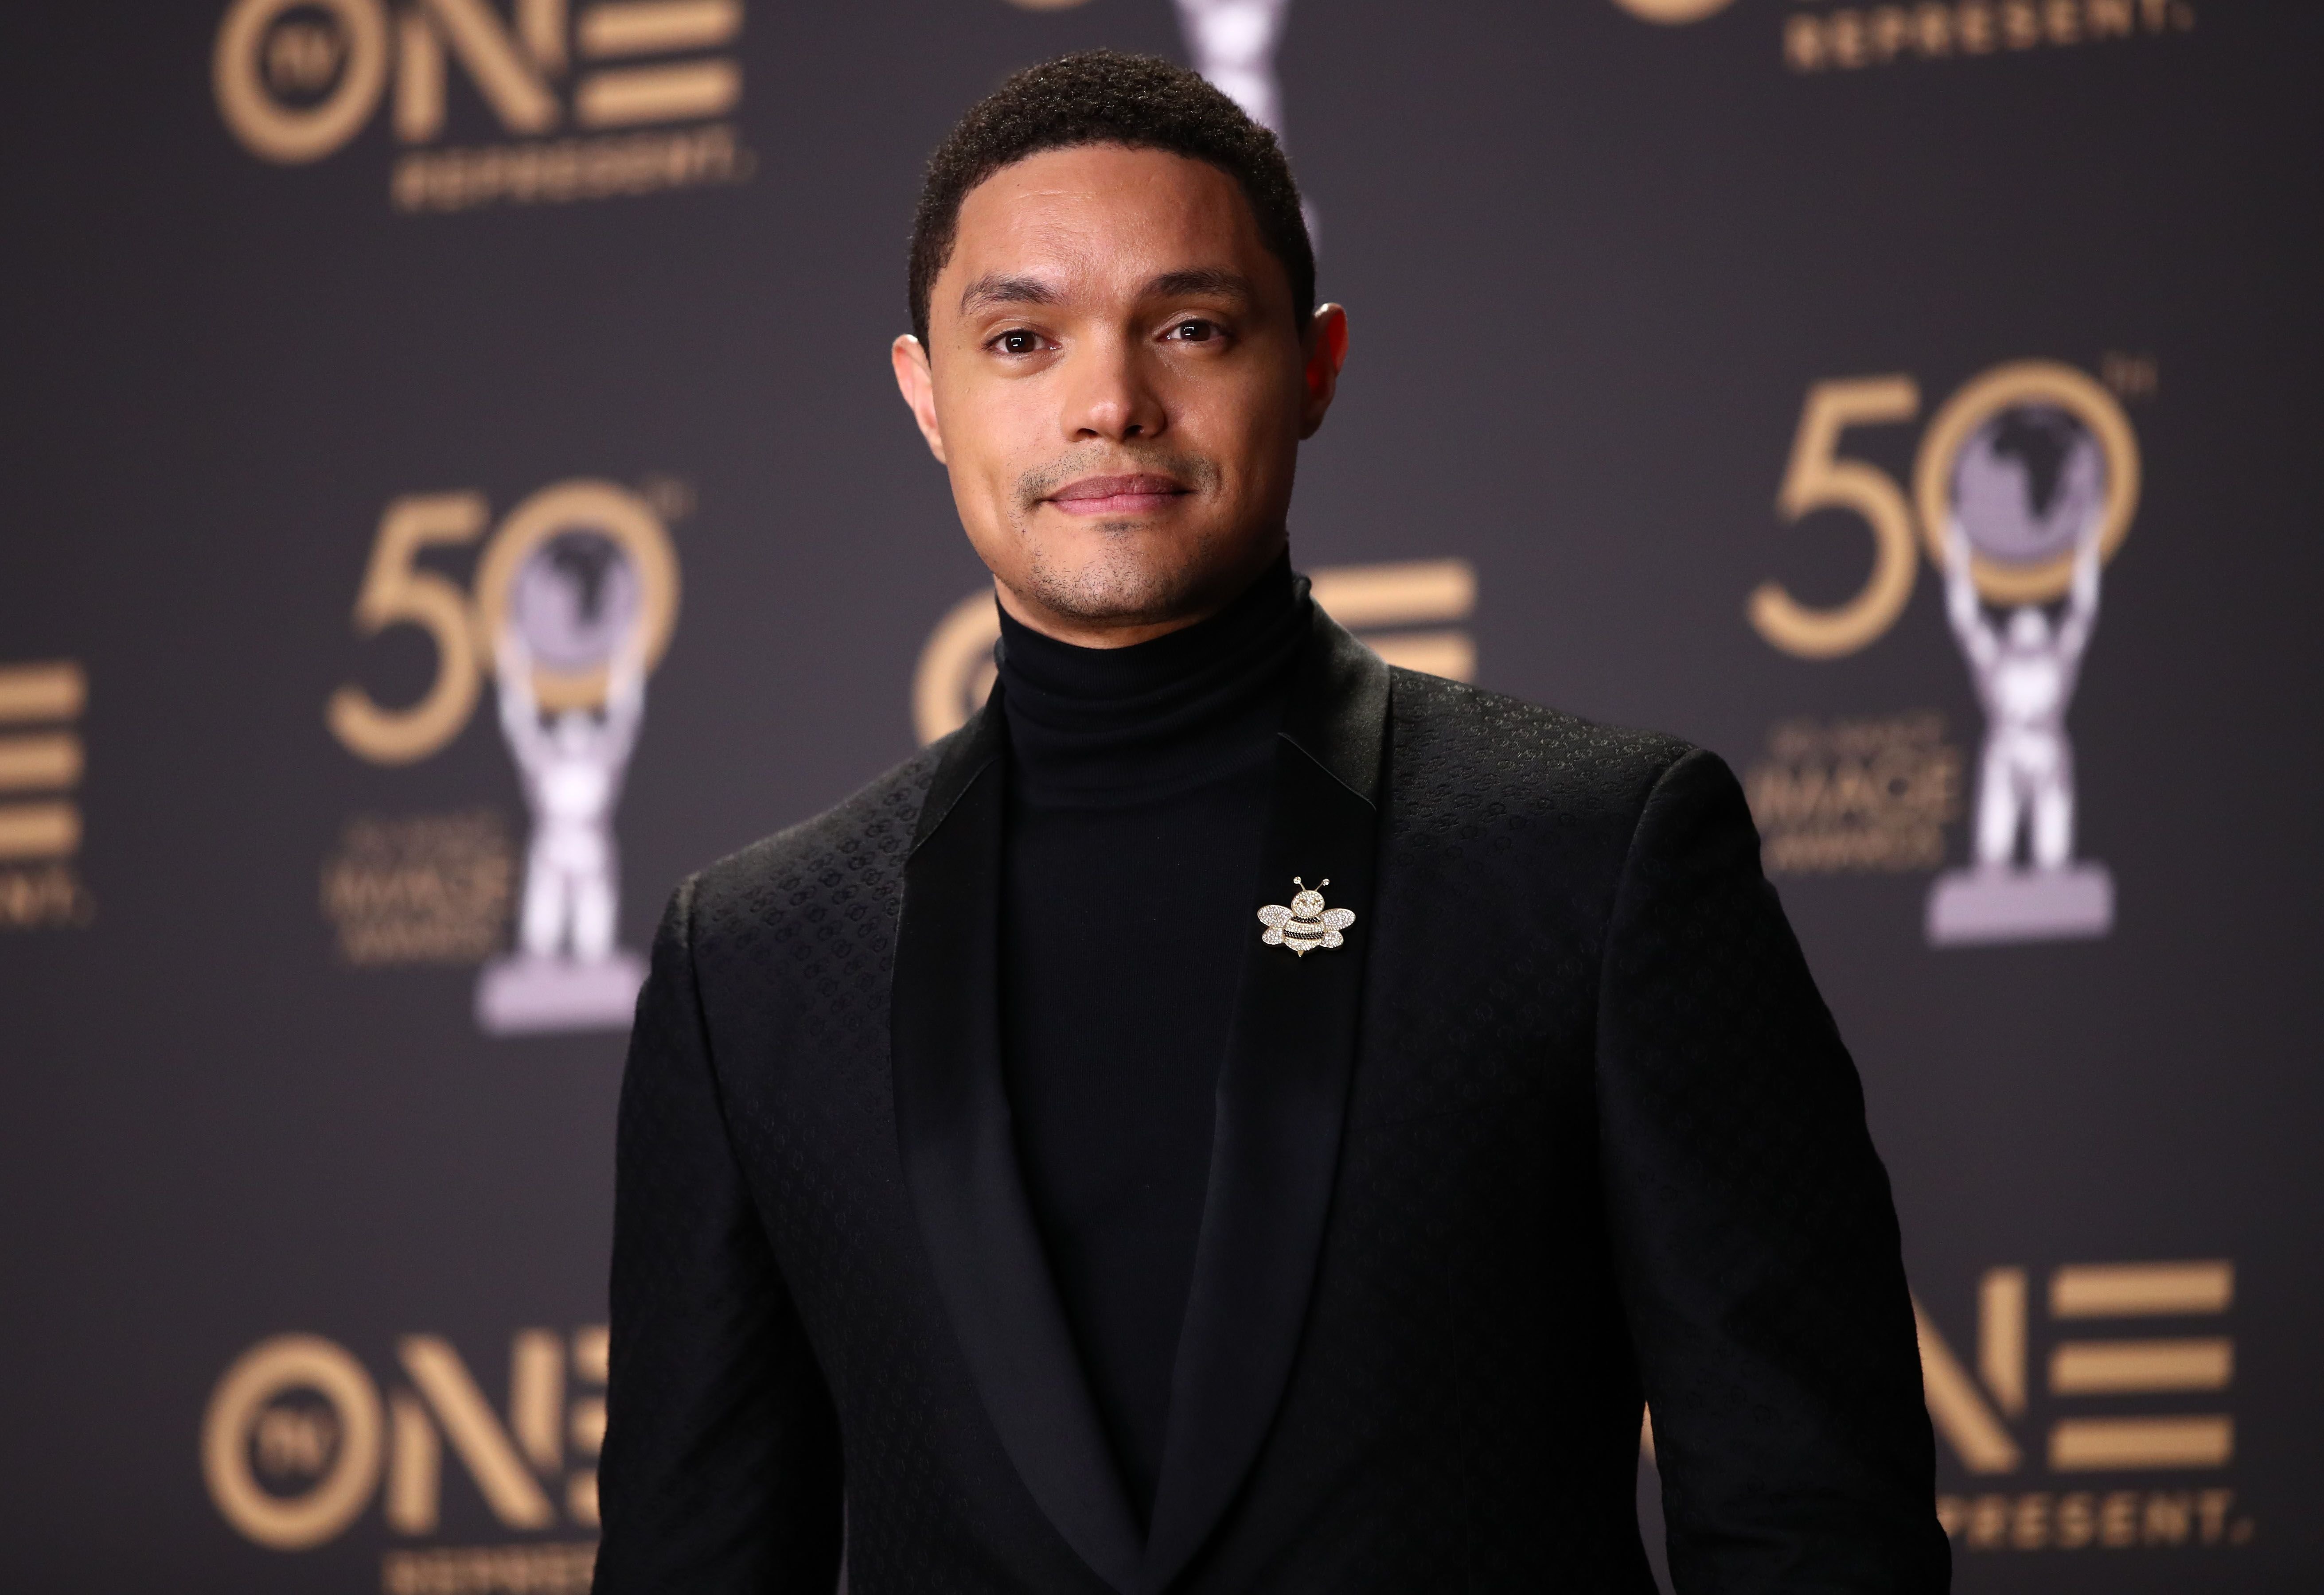 Trevor Noah at the 50th NAACP Image Awards at Dolby Theatre on March 30, 2019 in Hollywood, California | Photo: Getty Images